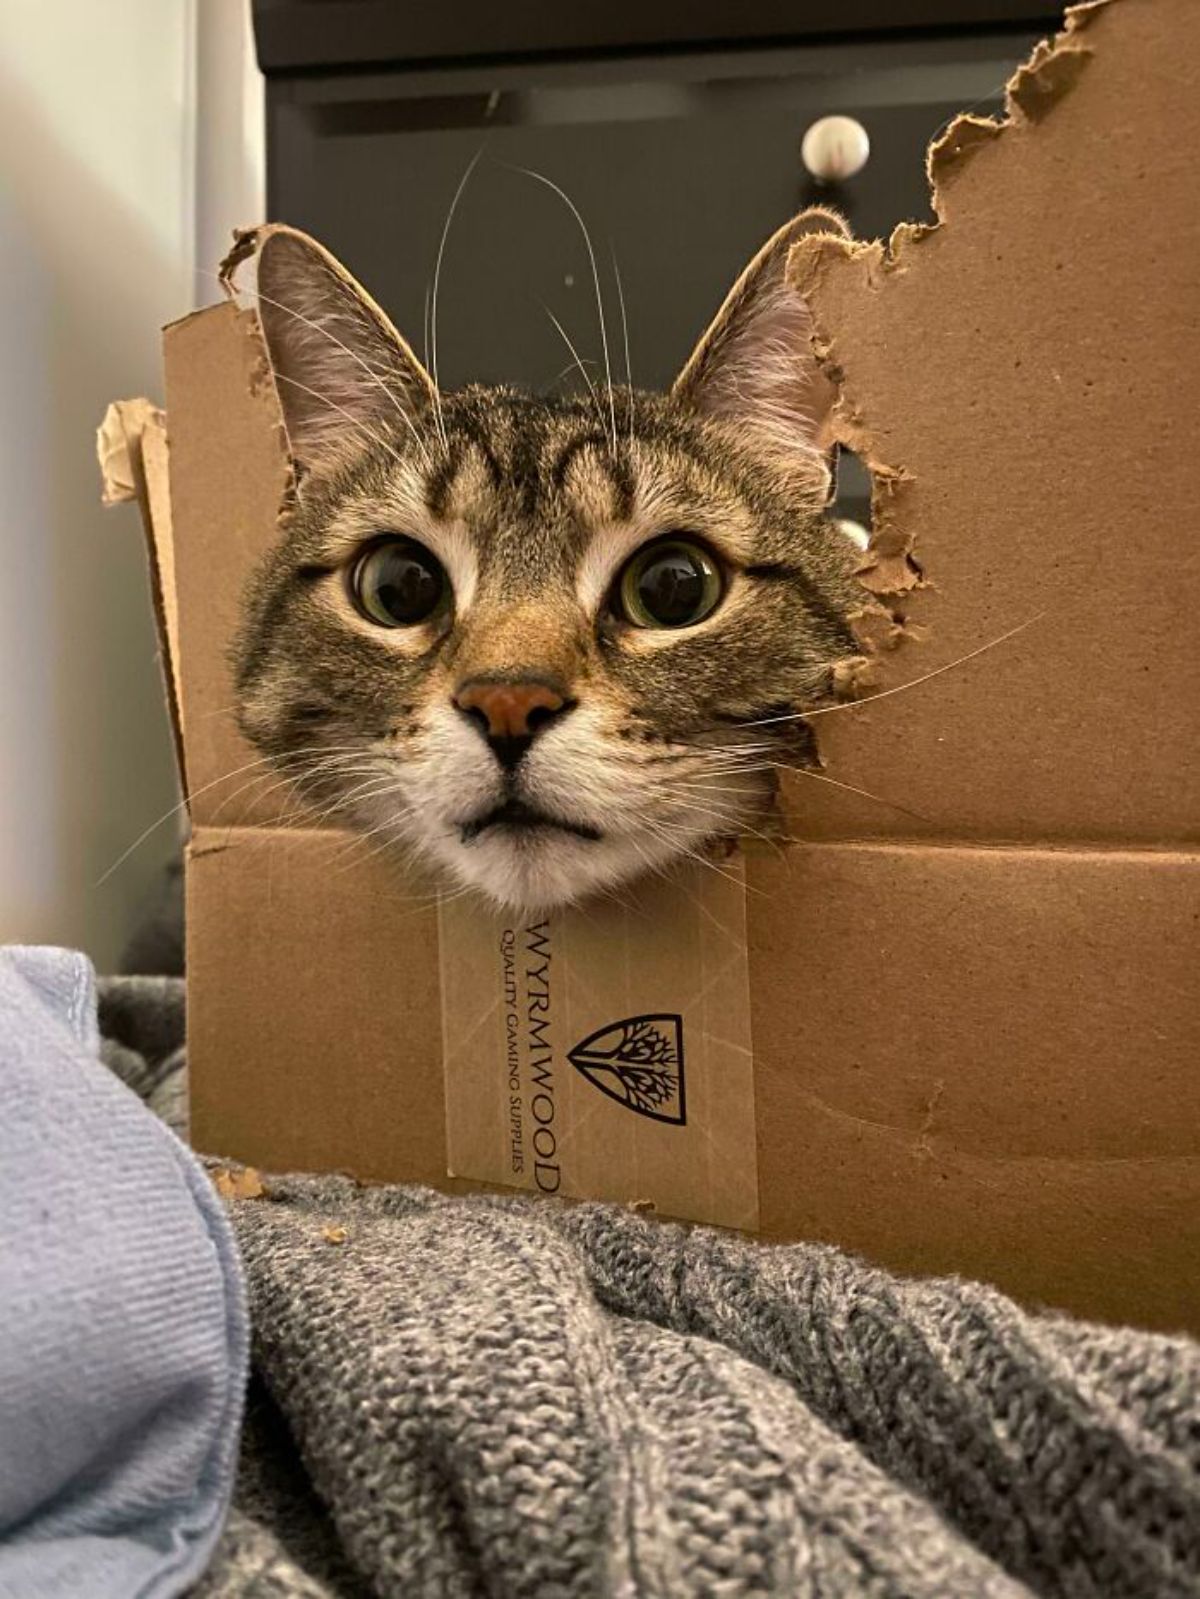 grey and white tabby cat with the head sticking out of a ripped up cardboard box